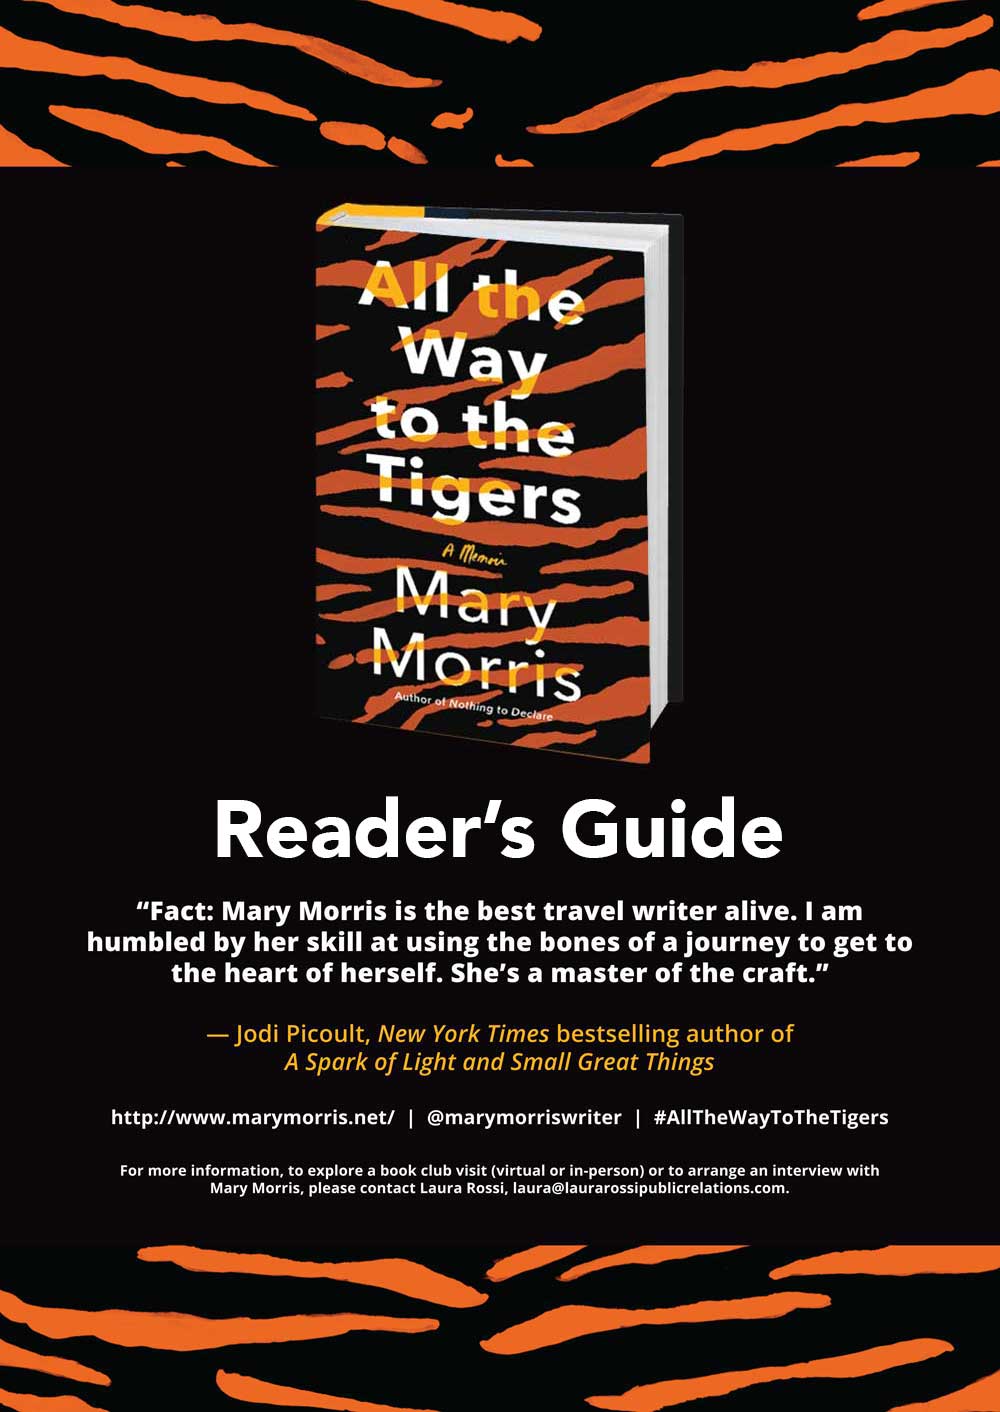 All the Way to the Tigers: Reading Guide